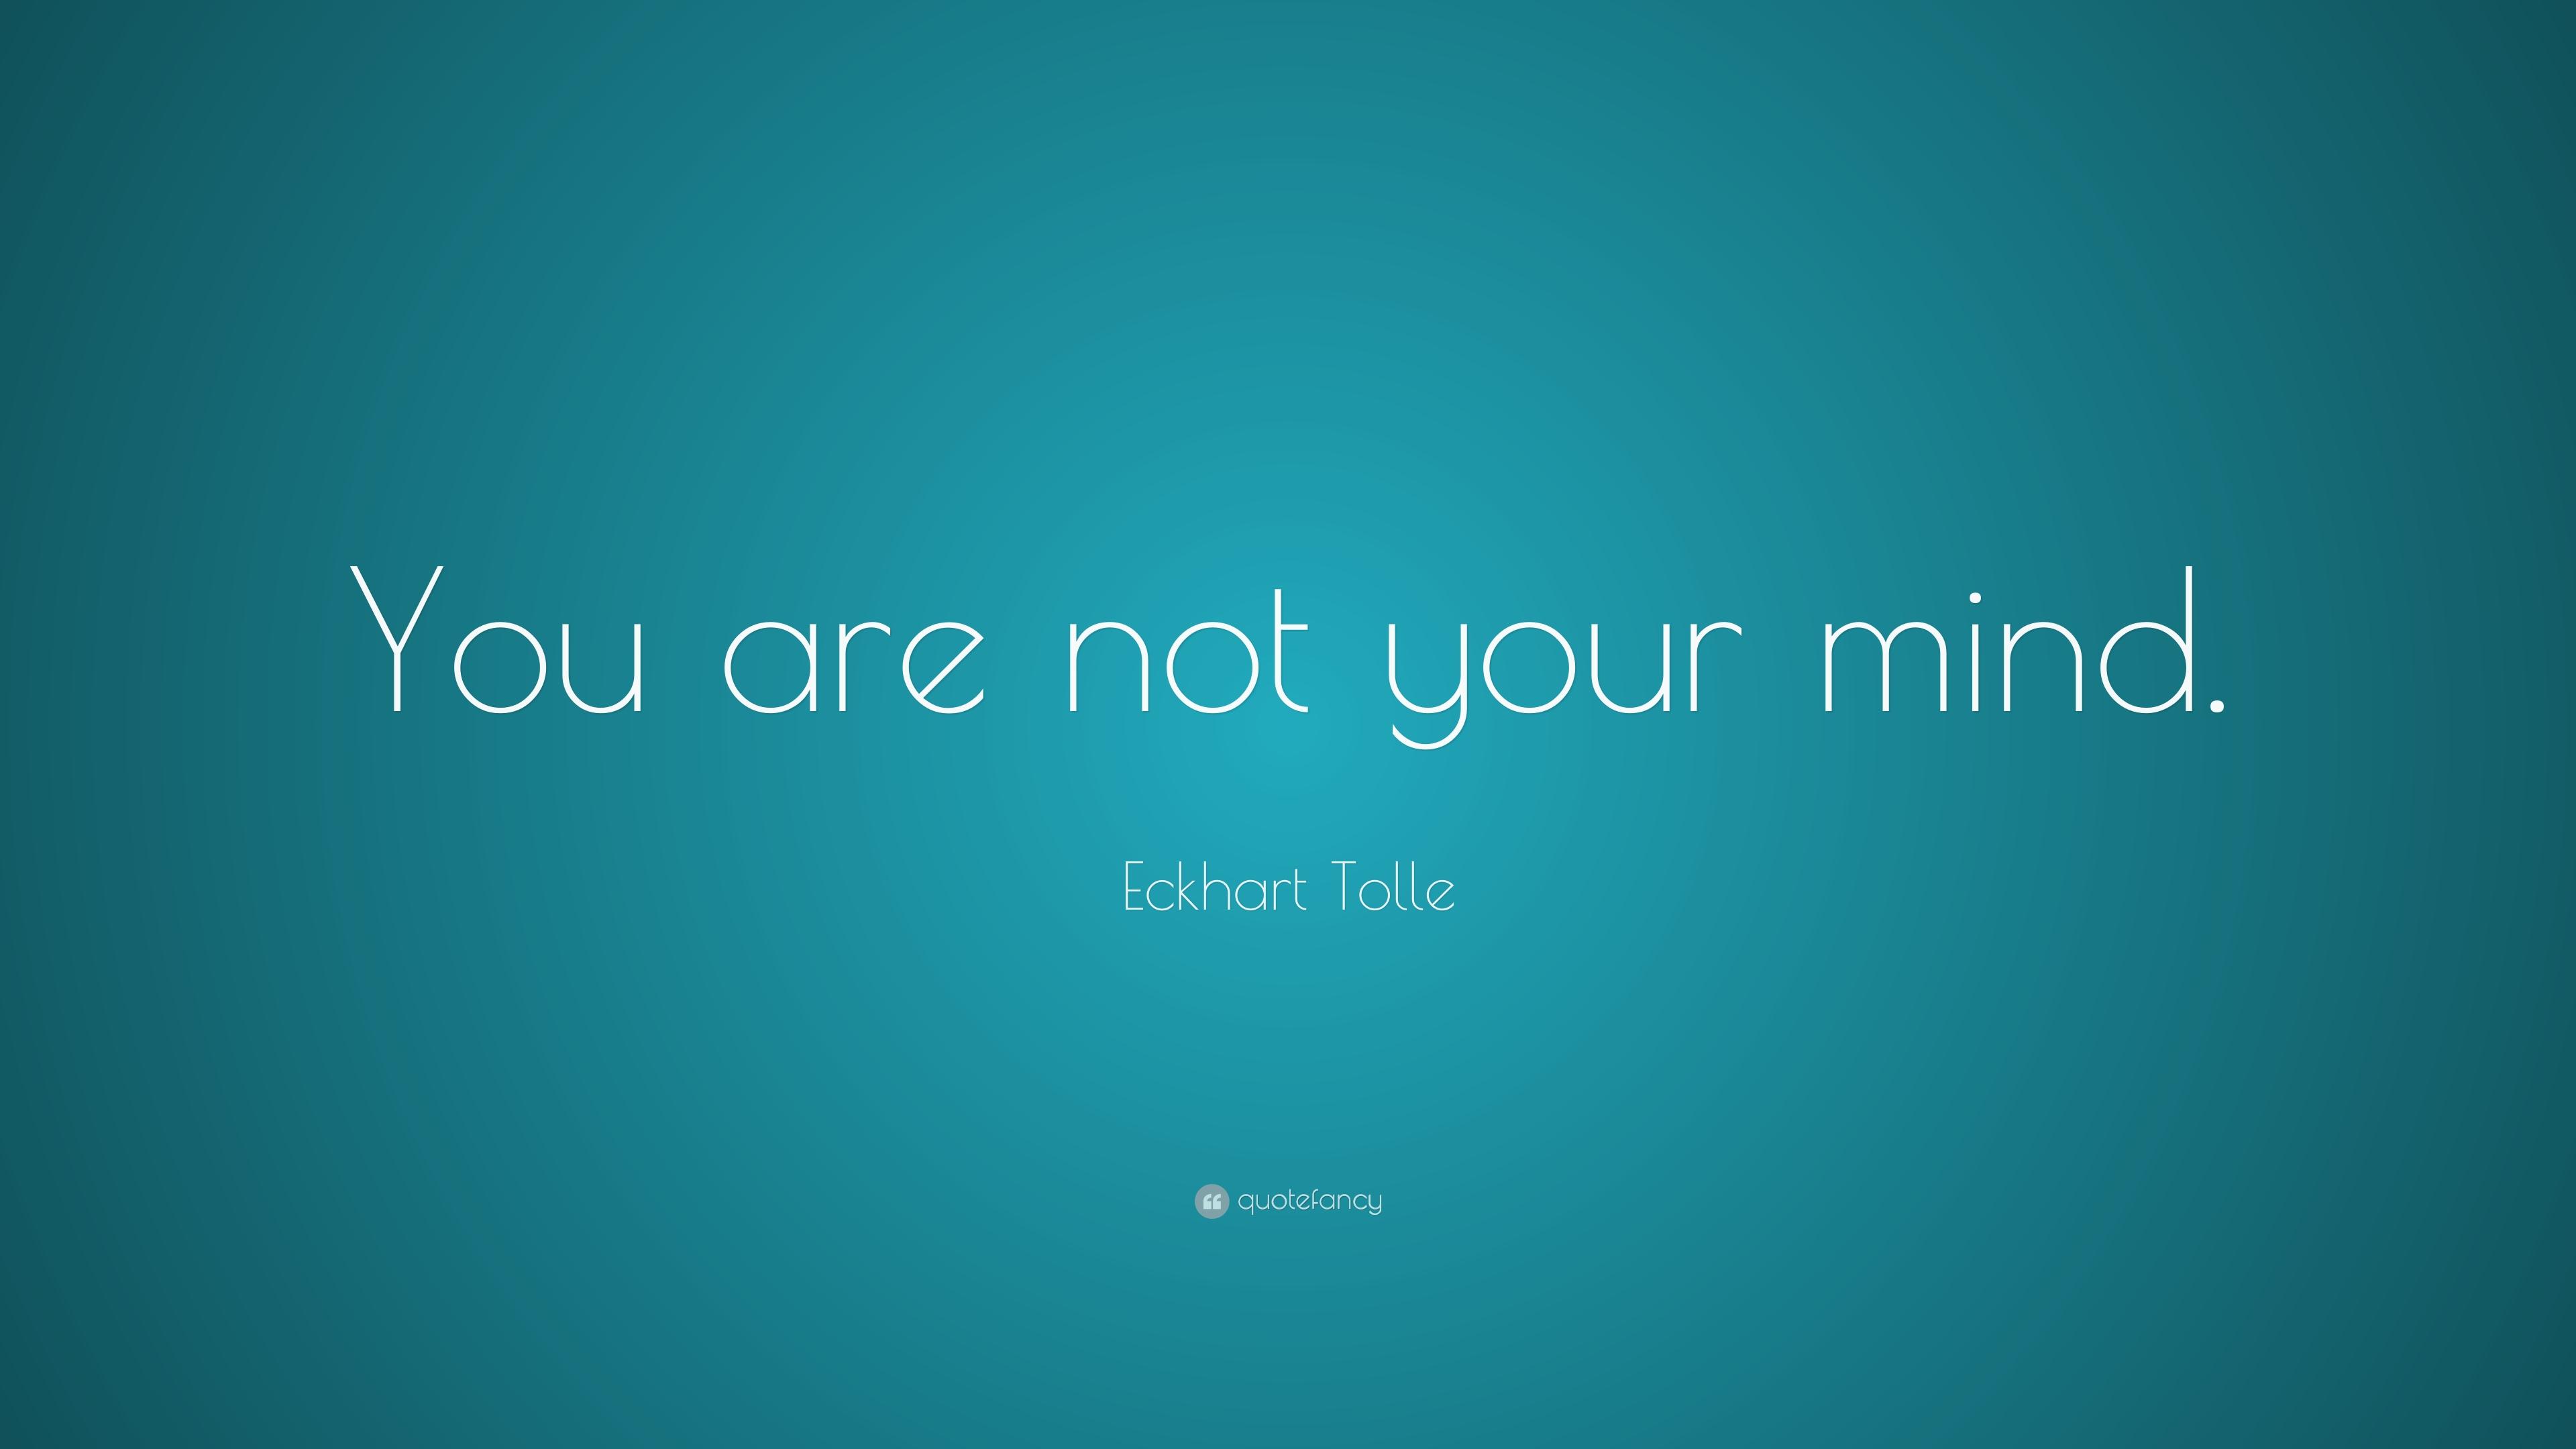 Eckhart Tolle Quote: “You are not your mind.” 23 wallpaper